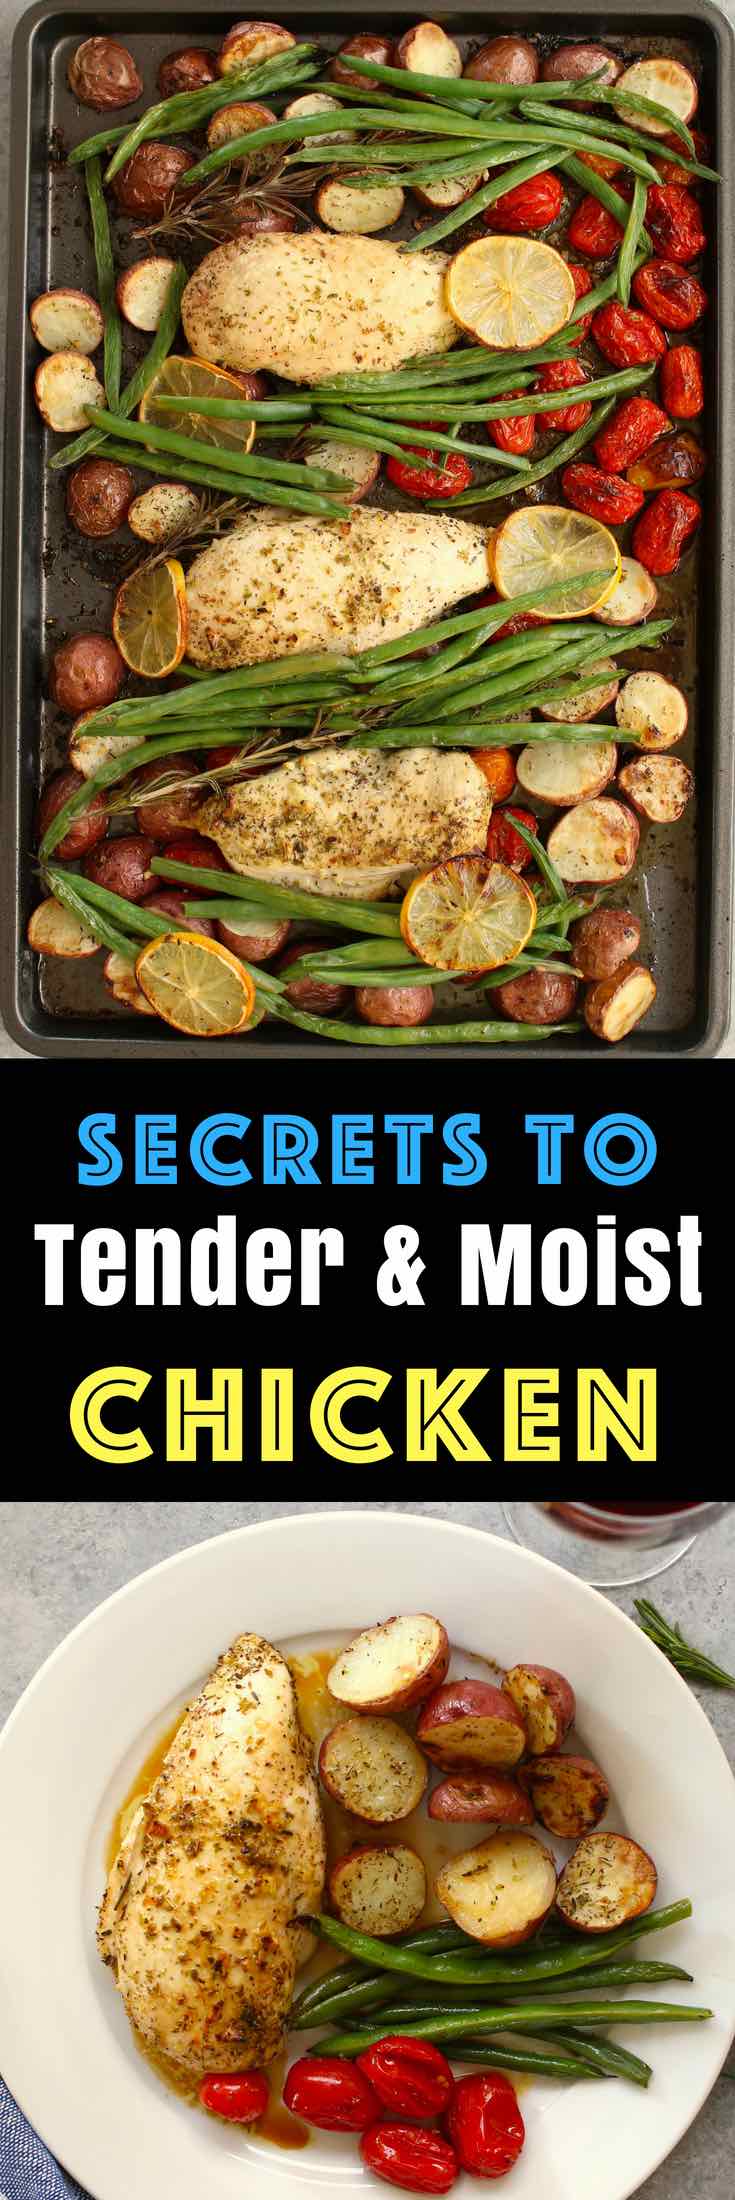 Baked Chicken Breasts with Vegetables are so flavorful and particularly low-fat compared to dark meat chicken. I am sharing with you all the secrets to yield the most delicious, tender and juicy chicken breast.